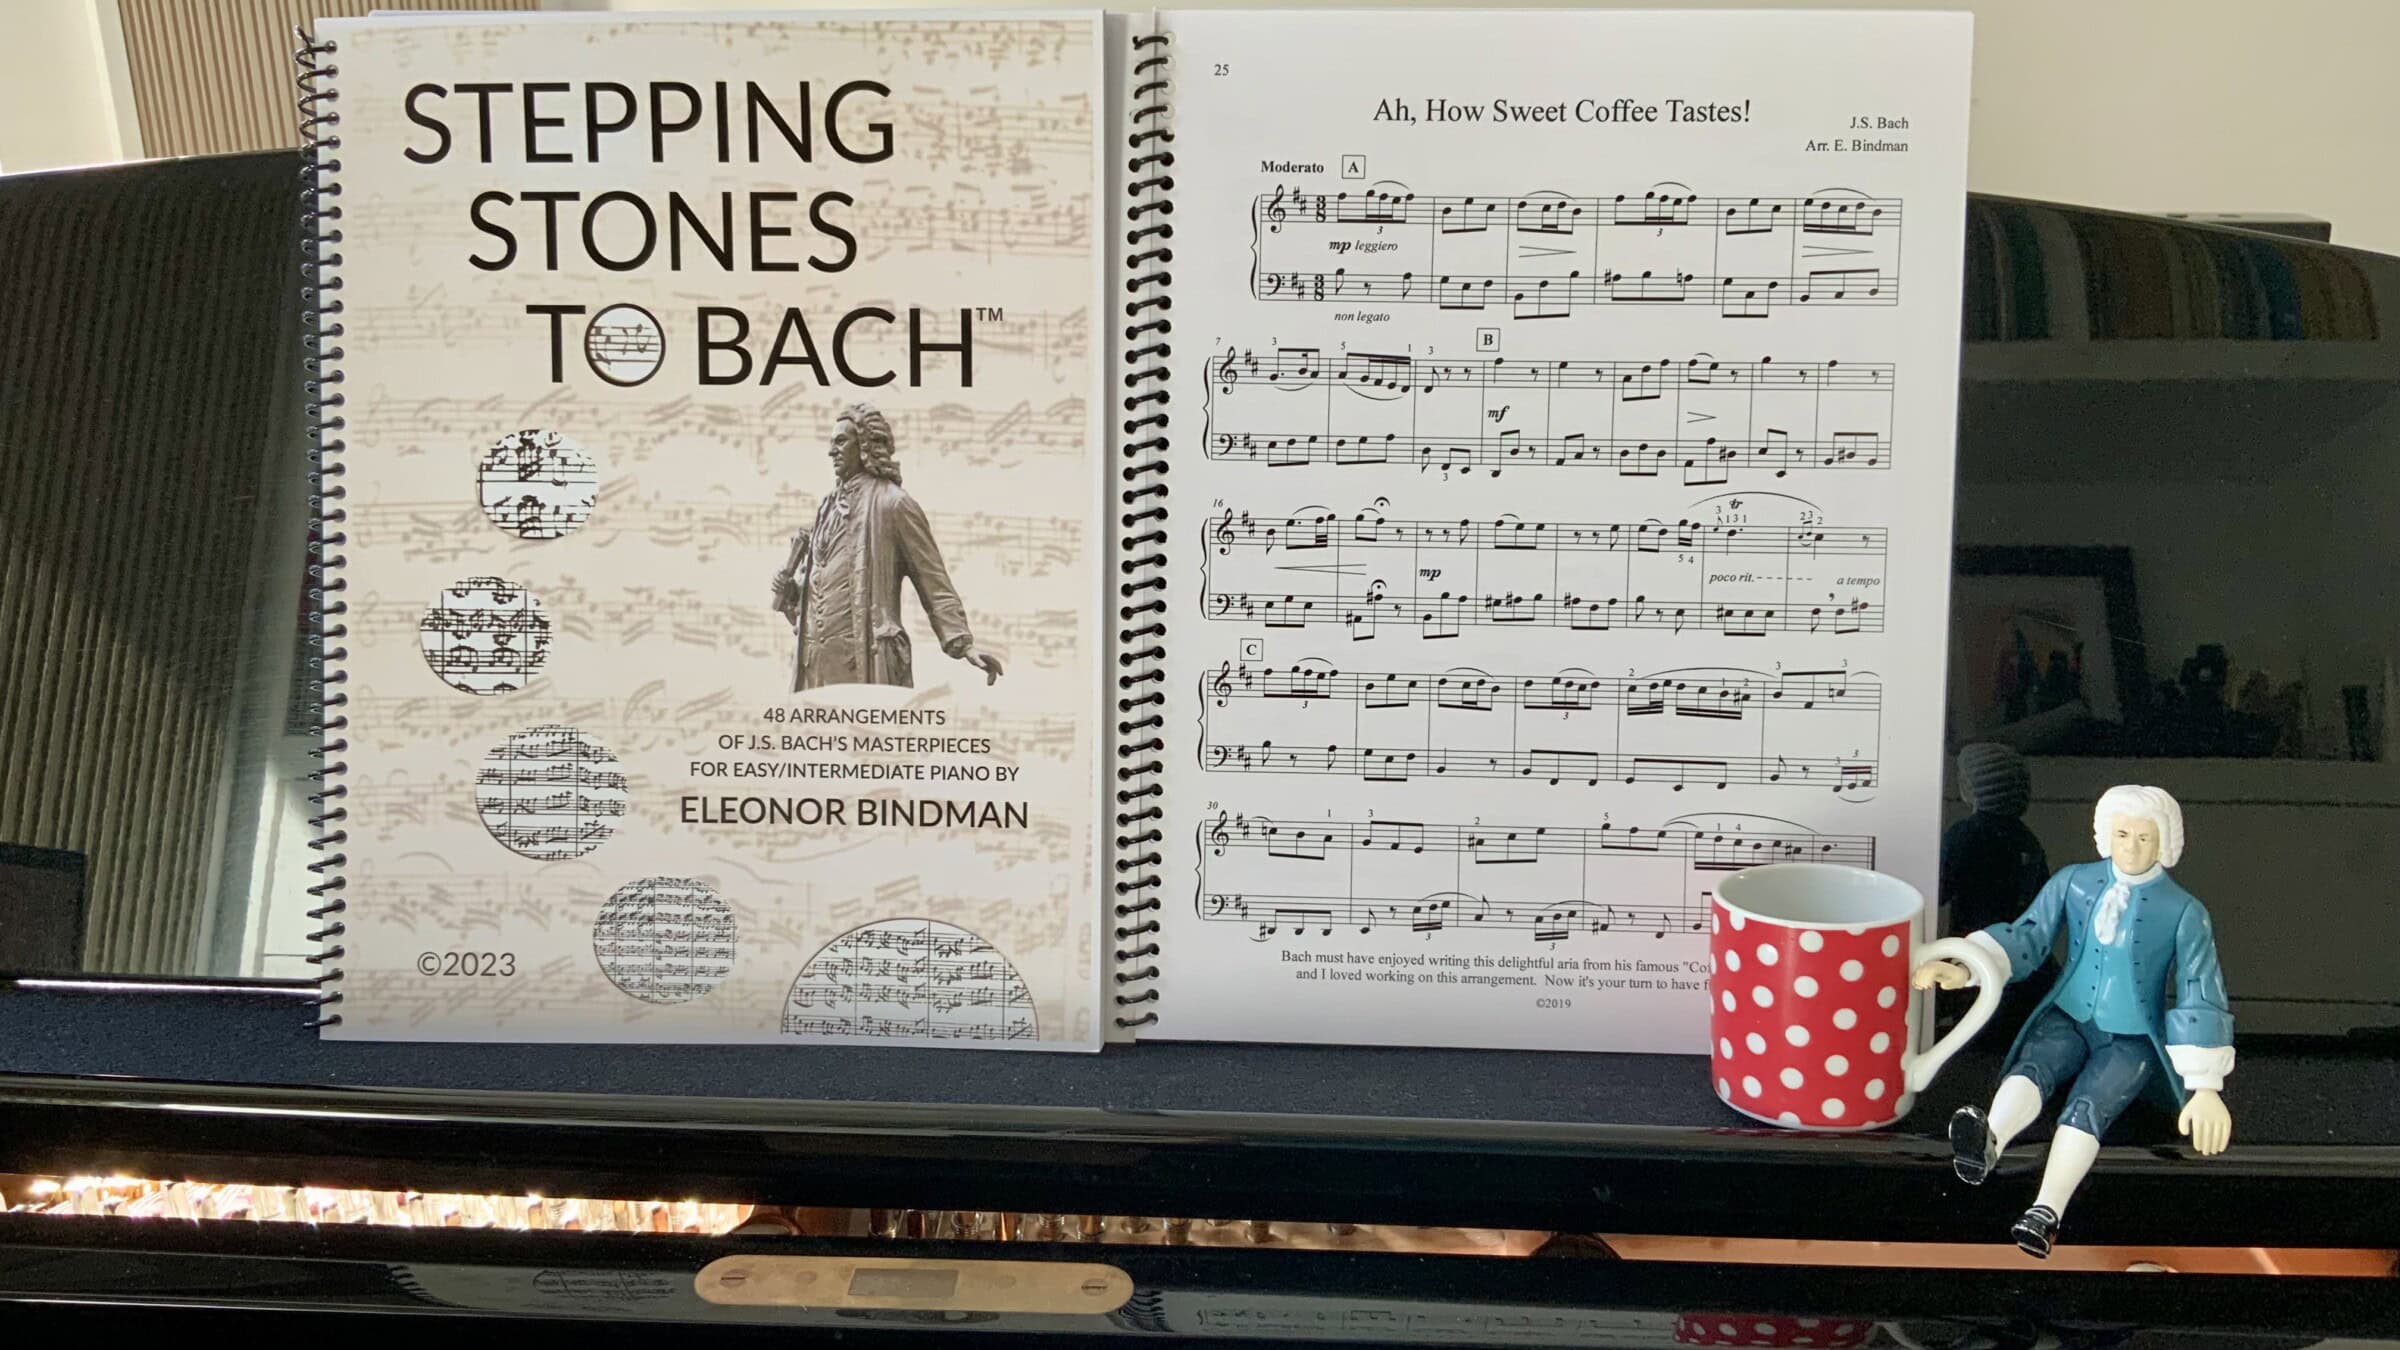 Bach statue on piano with coffe and stepping stones to bach volume with the score of Ah How Sweet Coffee Tastes